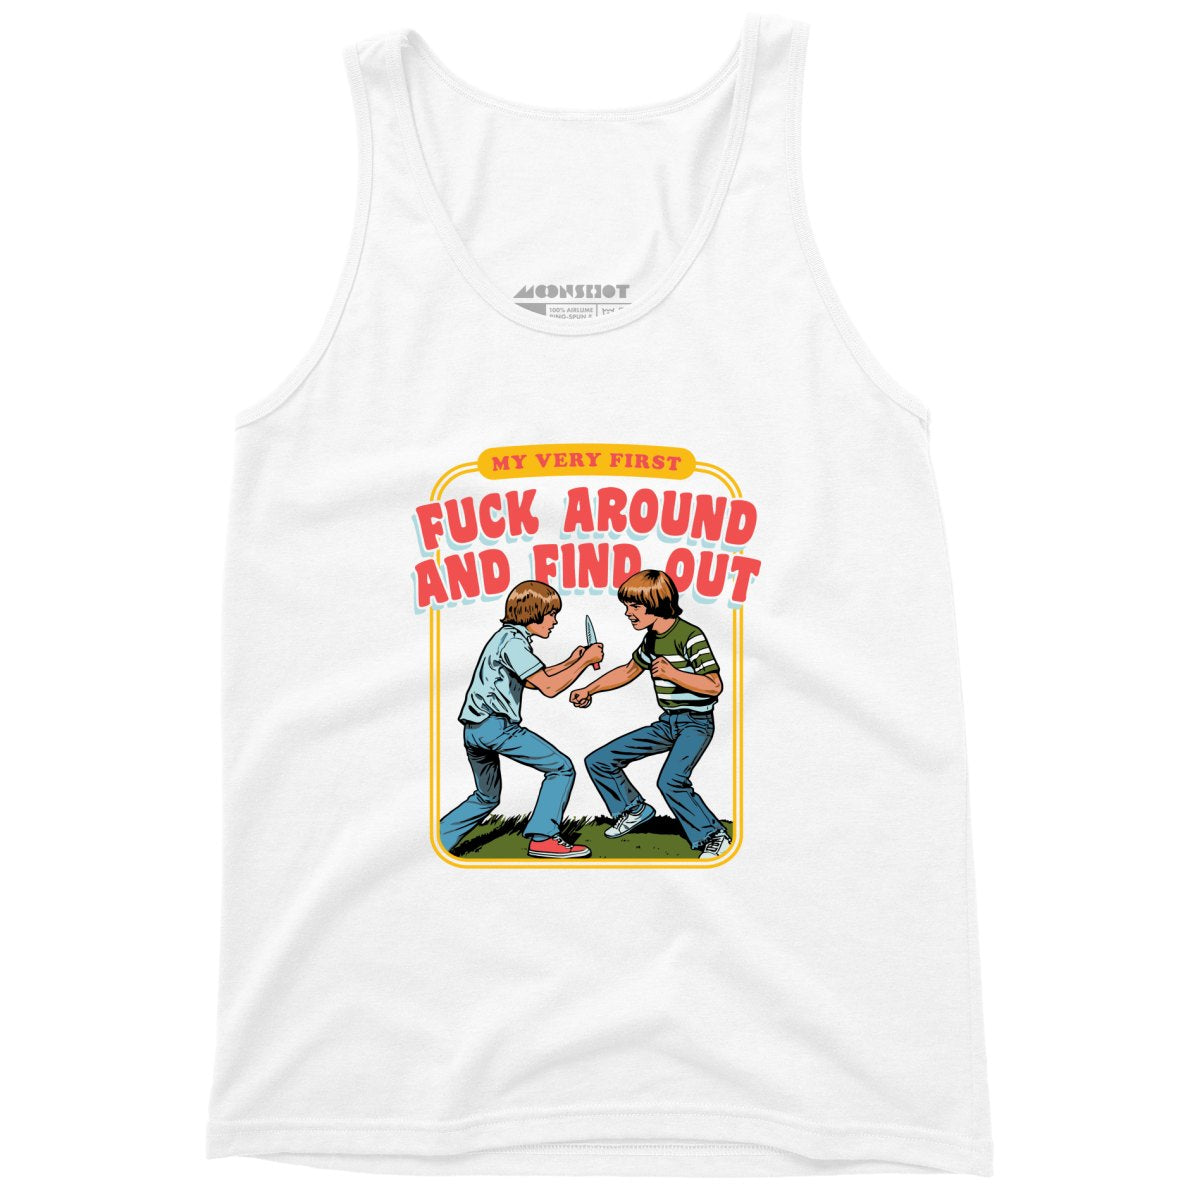 My Very First Fuck Around and Find Out - Unisex Tank Top